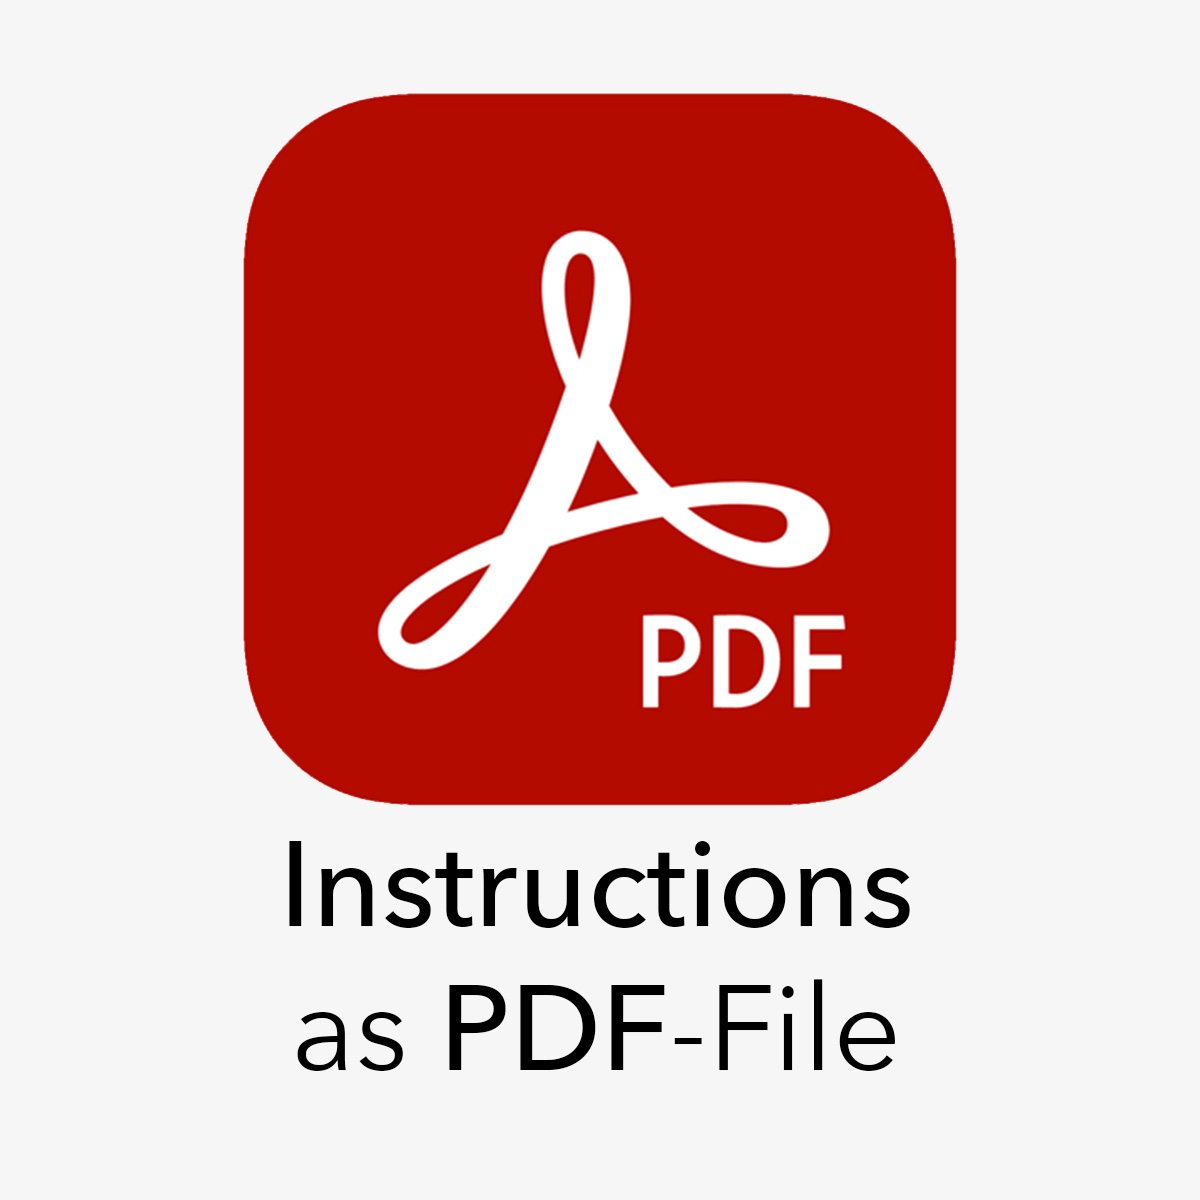  Instructions as PDF file 

 The instructions as PDF file are available for download in your customer account after purchasing the product. The download will be available once the order is marked as paid. You can find the file in your  customer account  under “ My Downloads ”. 